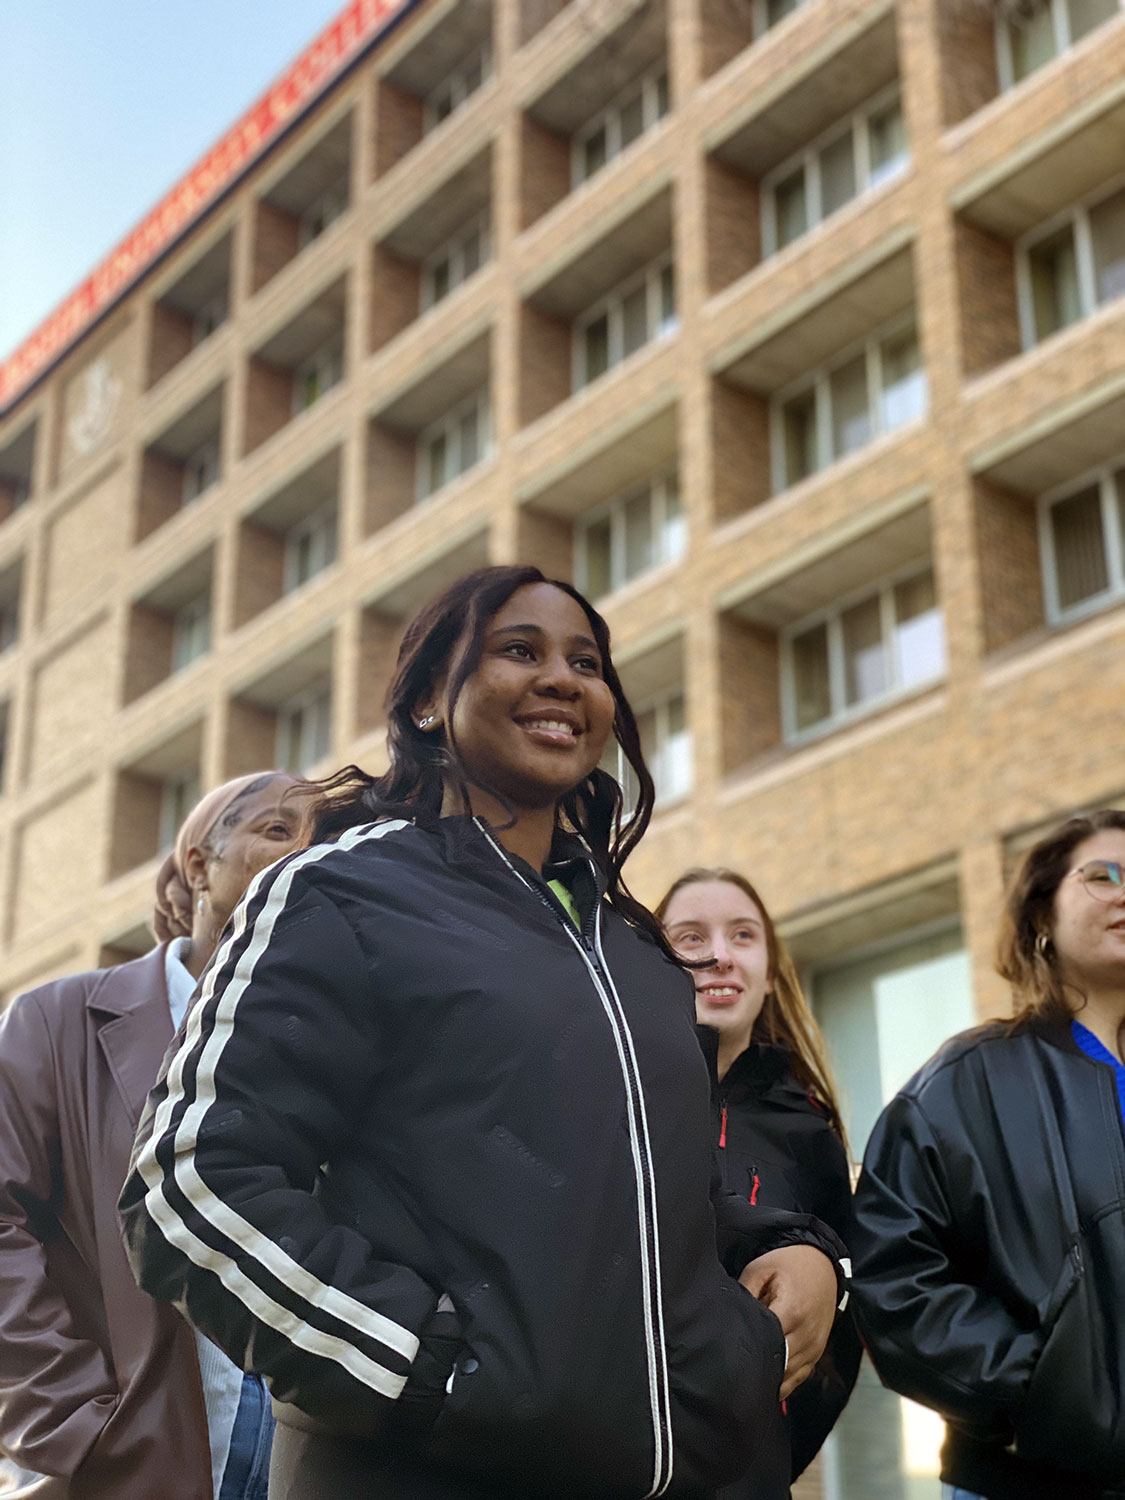 An international student standing with friends outside the main campus building.